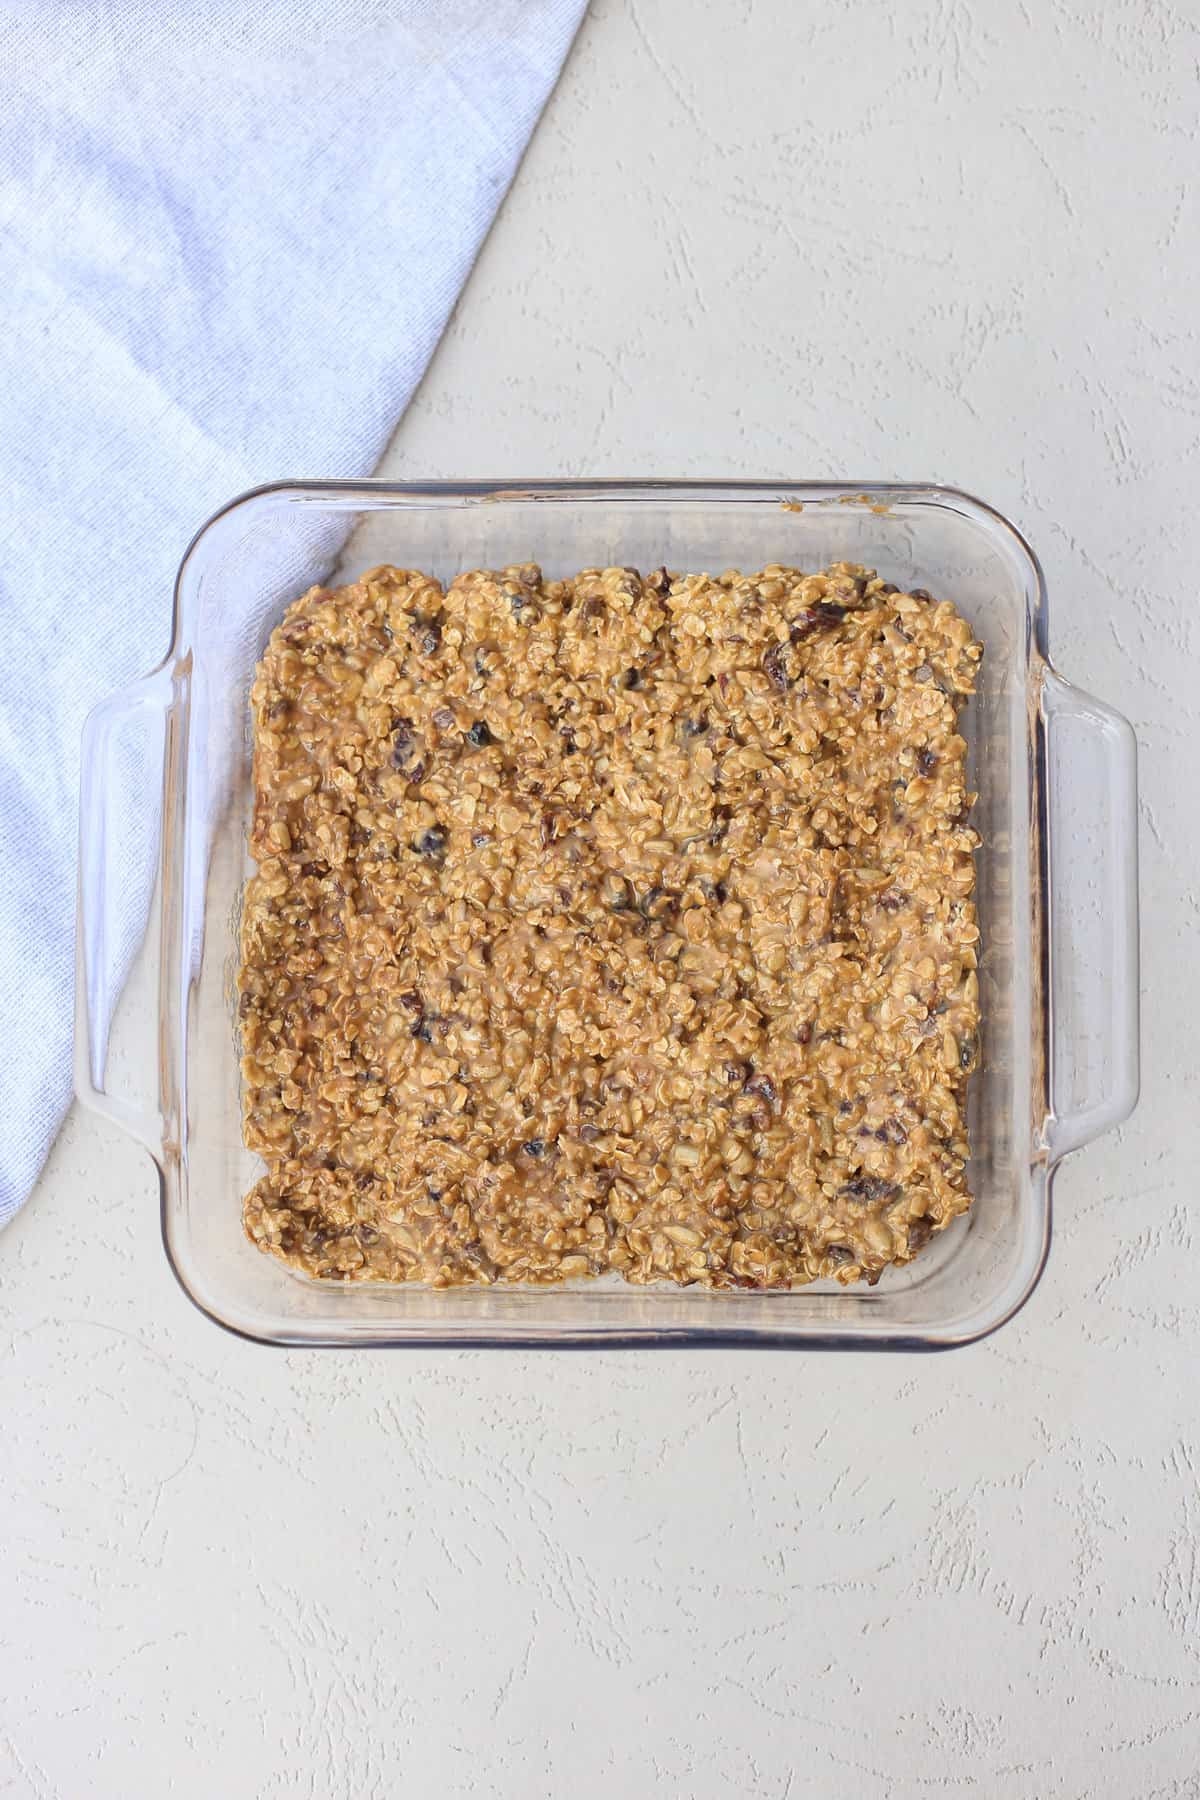 peanut butter protein bar mix in an 8x8 glass dish